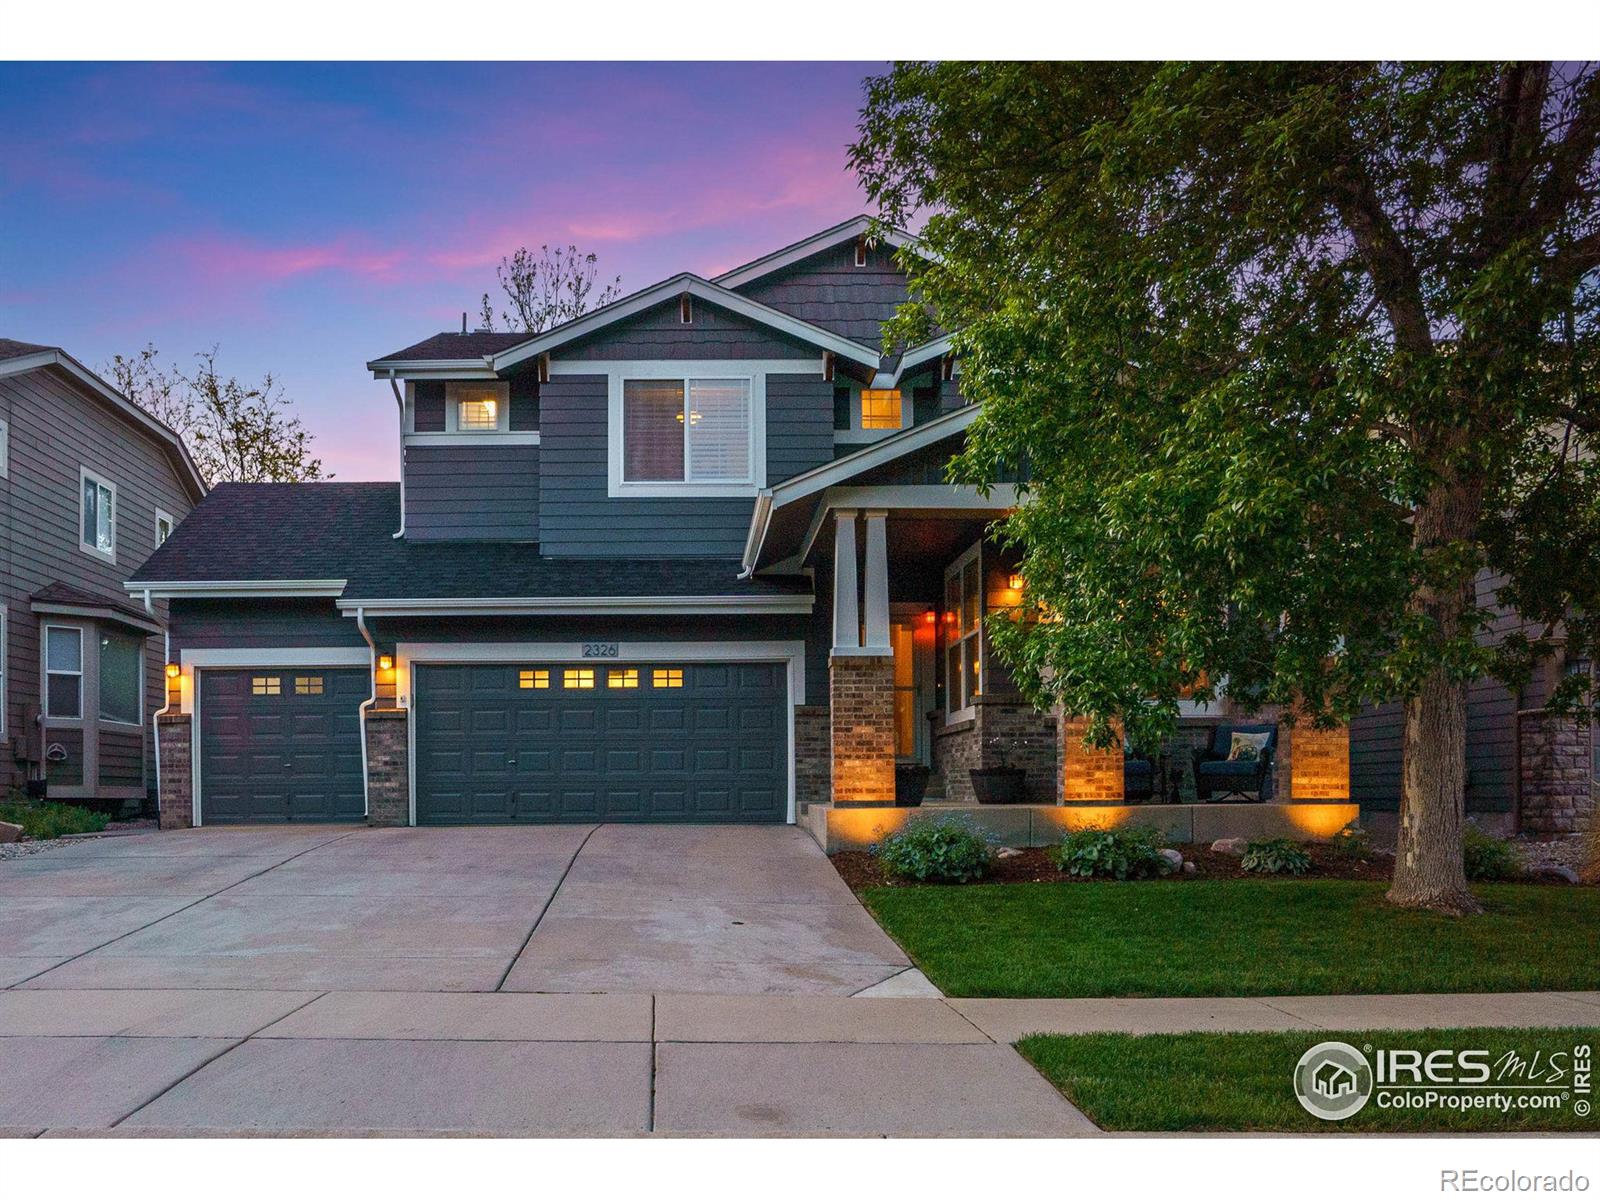 Report Image for 2326  Chandler Street,Fort Collins, Colorado